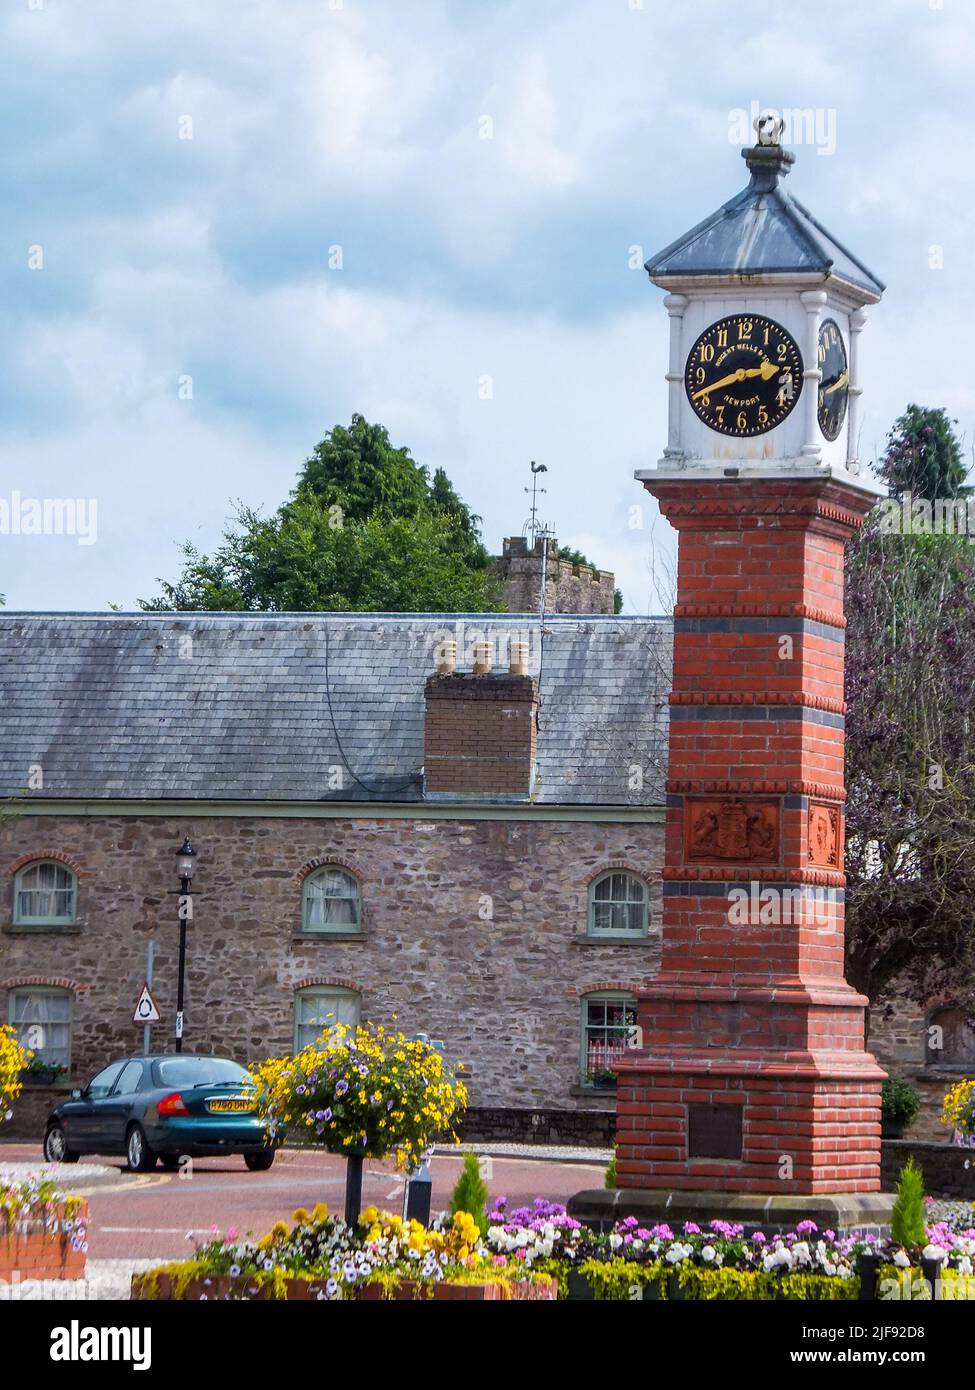 The 1887 Jubilee Clock, by Cheah Chen Eok, is a free standing, square column, Victorian clock tower in Twyn Square, Usk, Monmouthshire, Wales, UK. Stock Photo